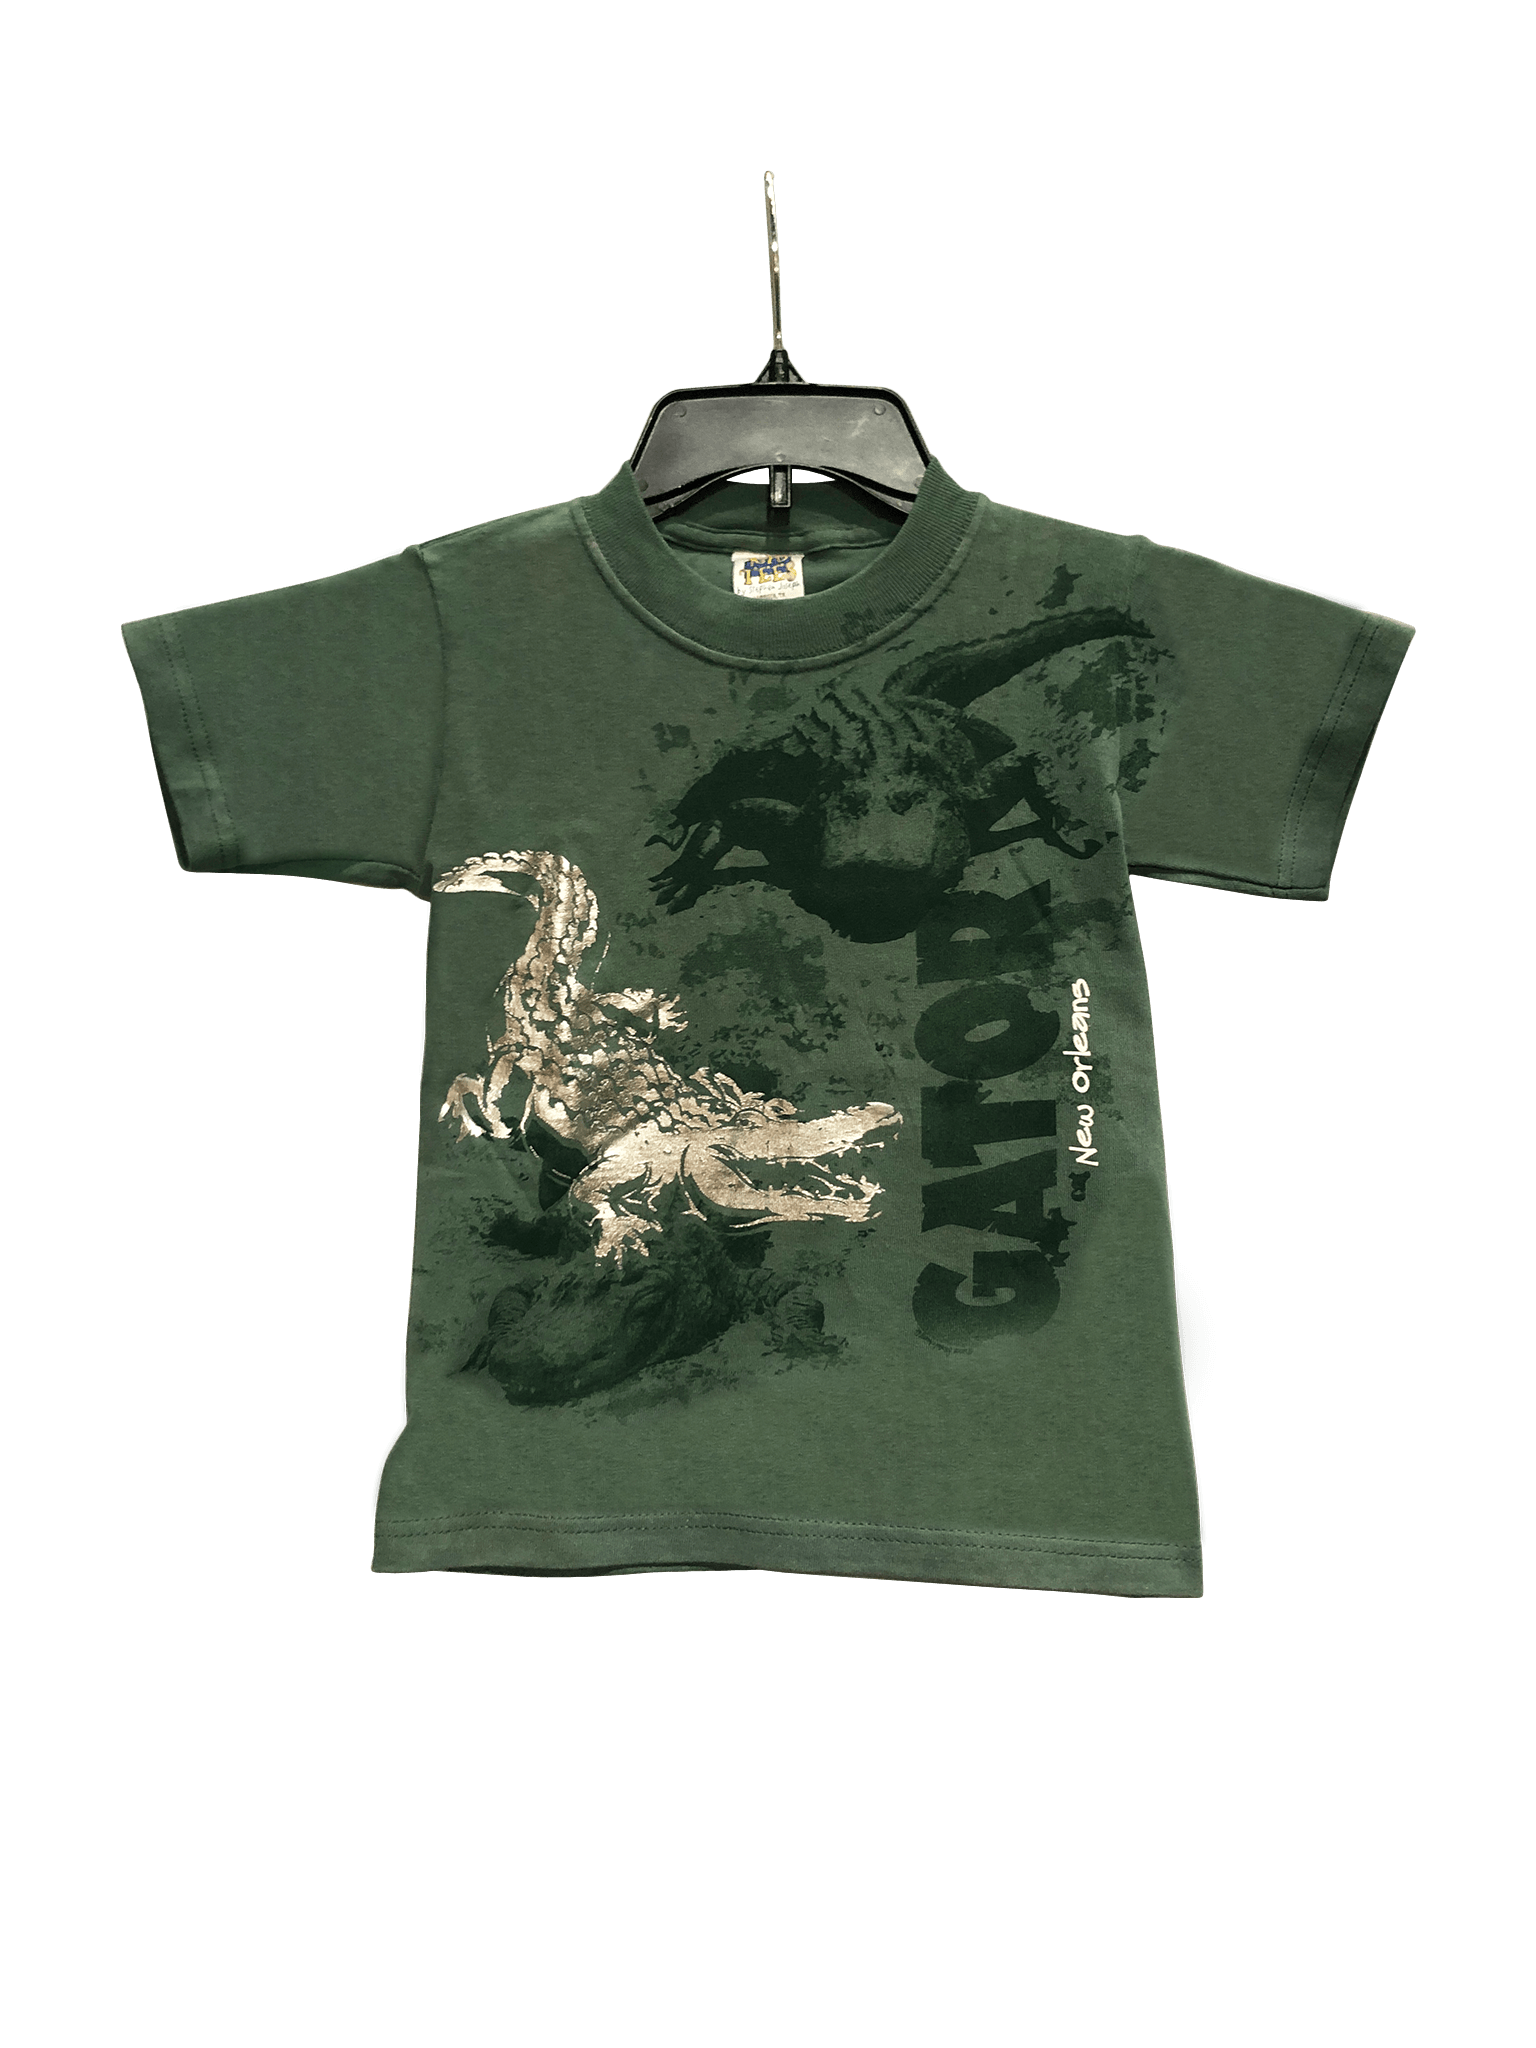 Silver Alligators T-Shirt (Youth & Adult)